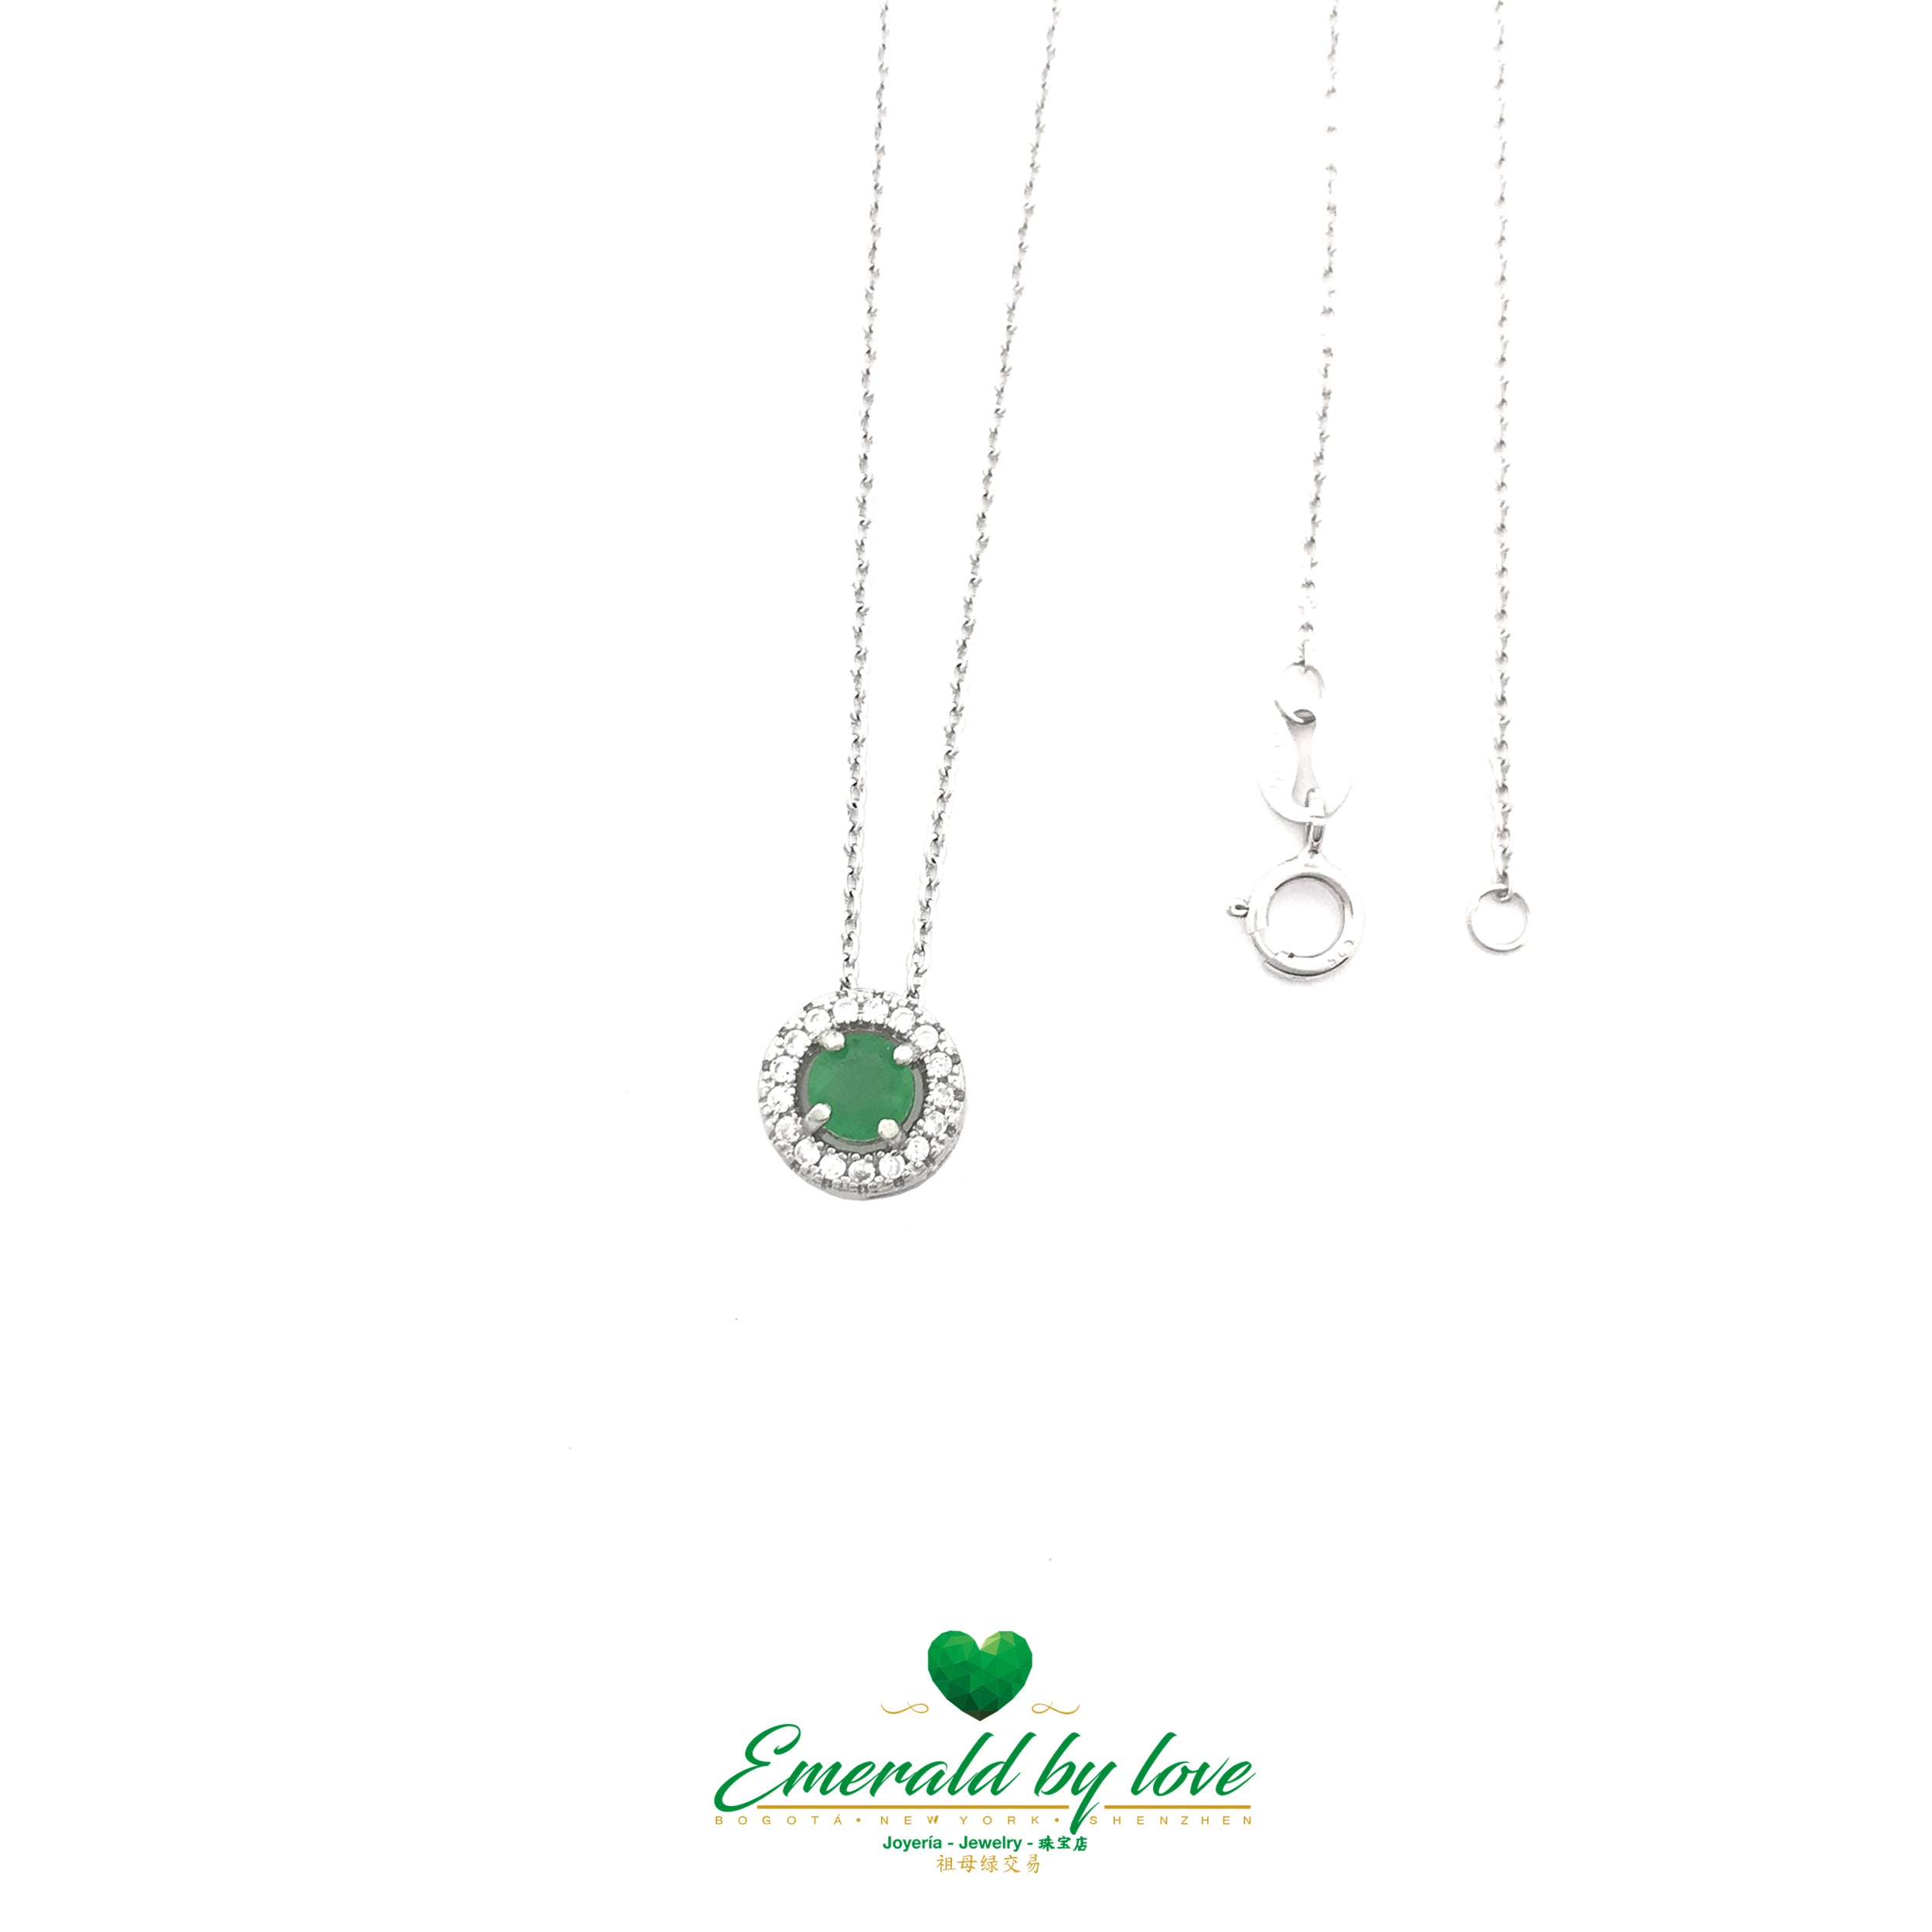 Circular Pendant with Halo of Cubic Zirconia and Central Round Crystal Emerald